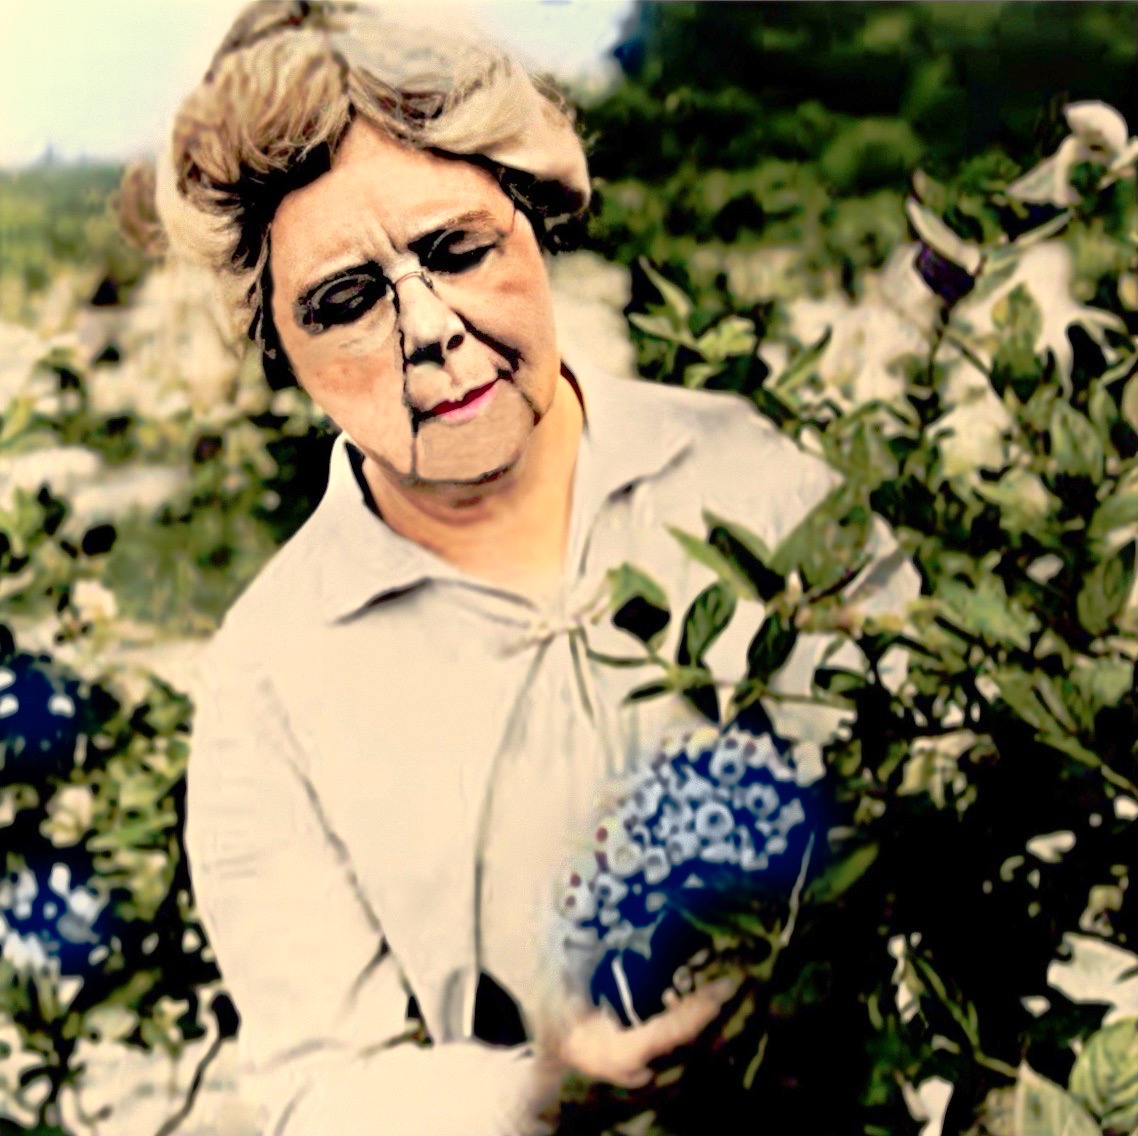 Elizabeth Coleman White inspects her blueberries